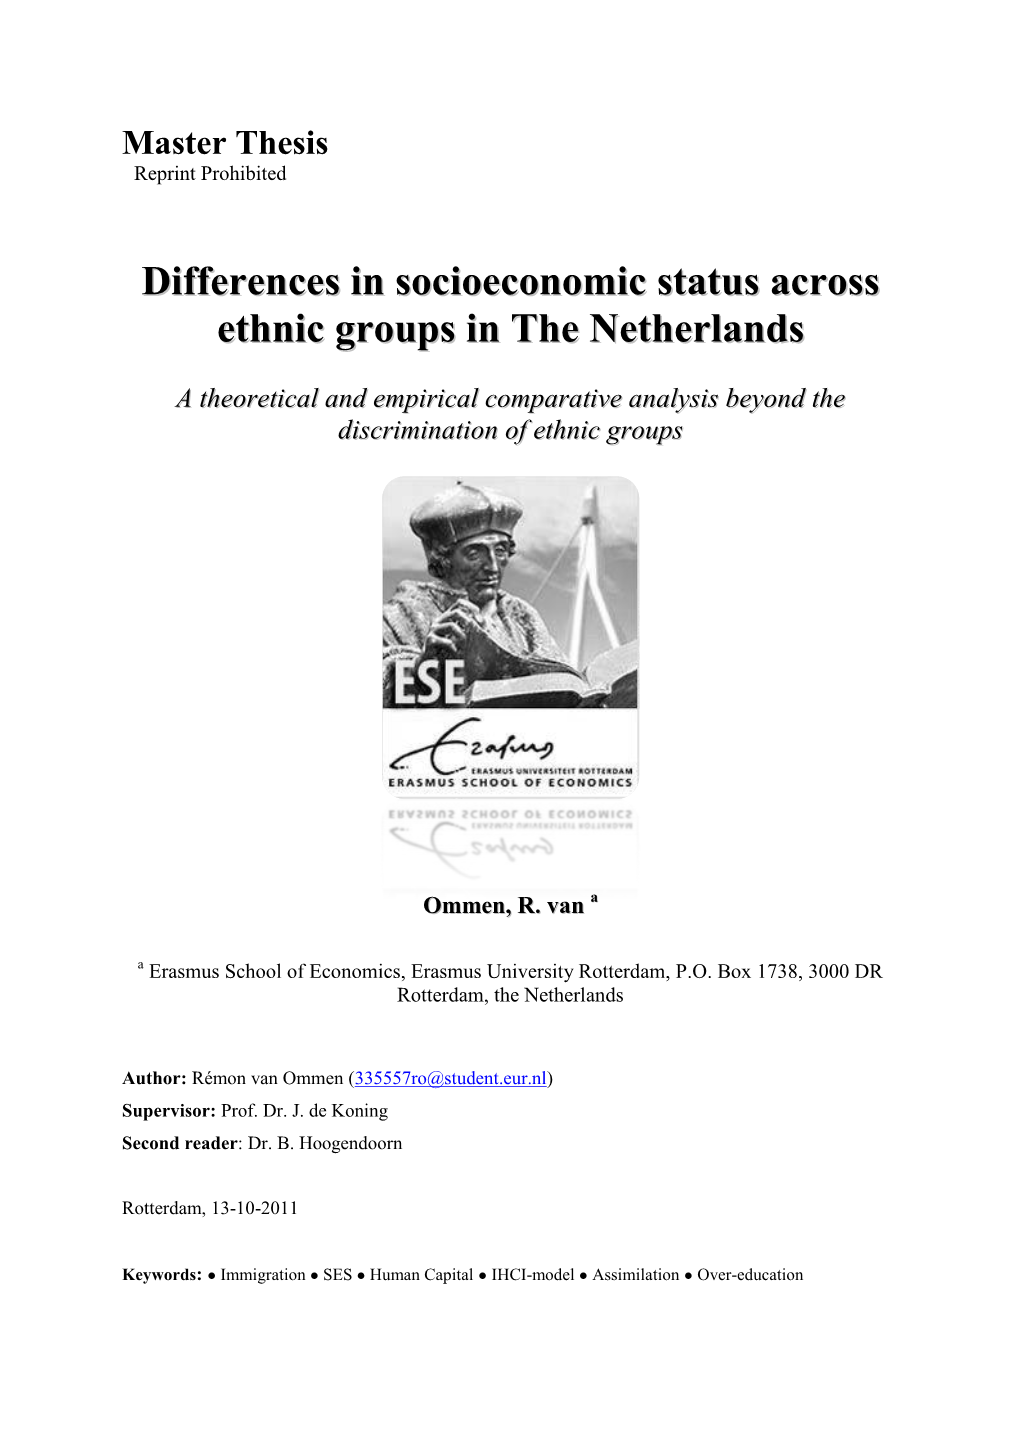 Differences in Socioeconomic Status Across Ethnic Groups in the Netherlands